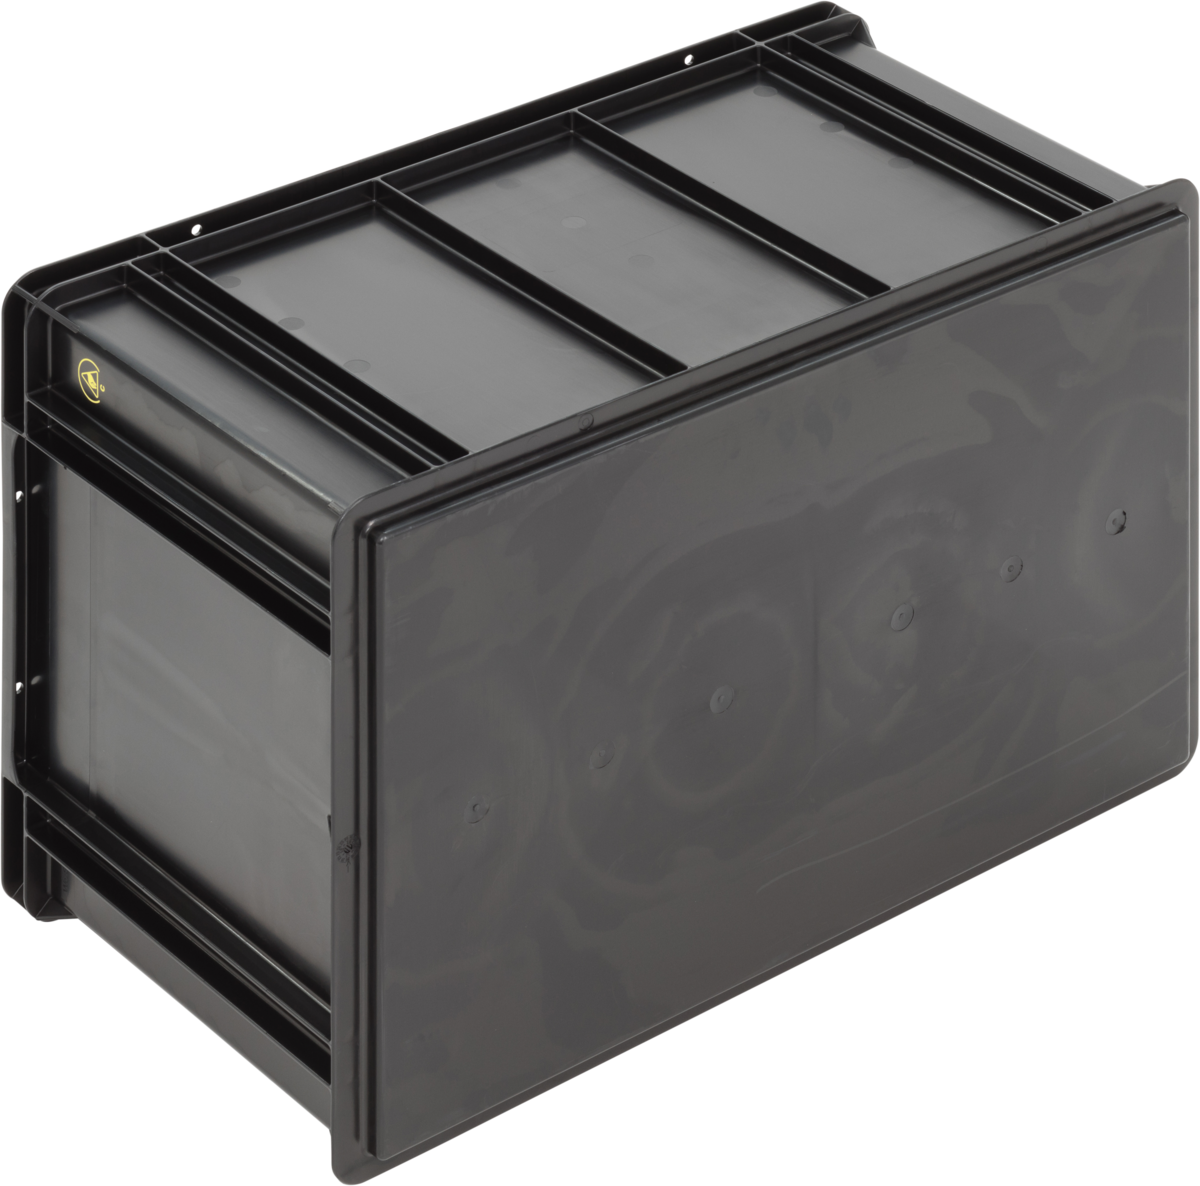 ESD-Safe-SGL-Norm-Stacking-Bin-Containers-Flat-Base-Ref.-6432.007.992_1004519_600x400x320_02